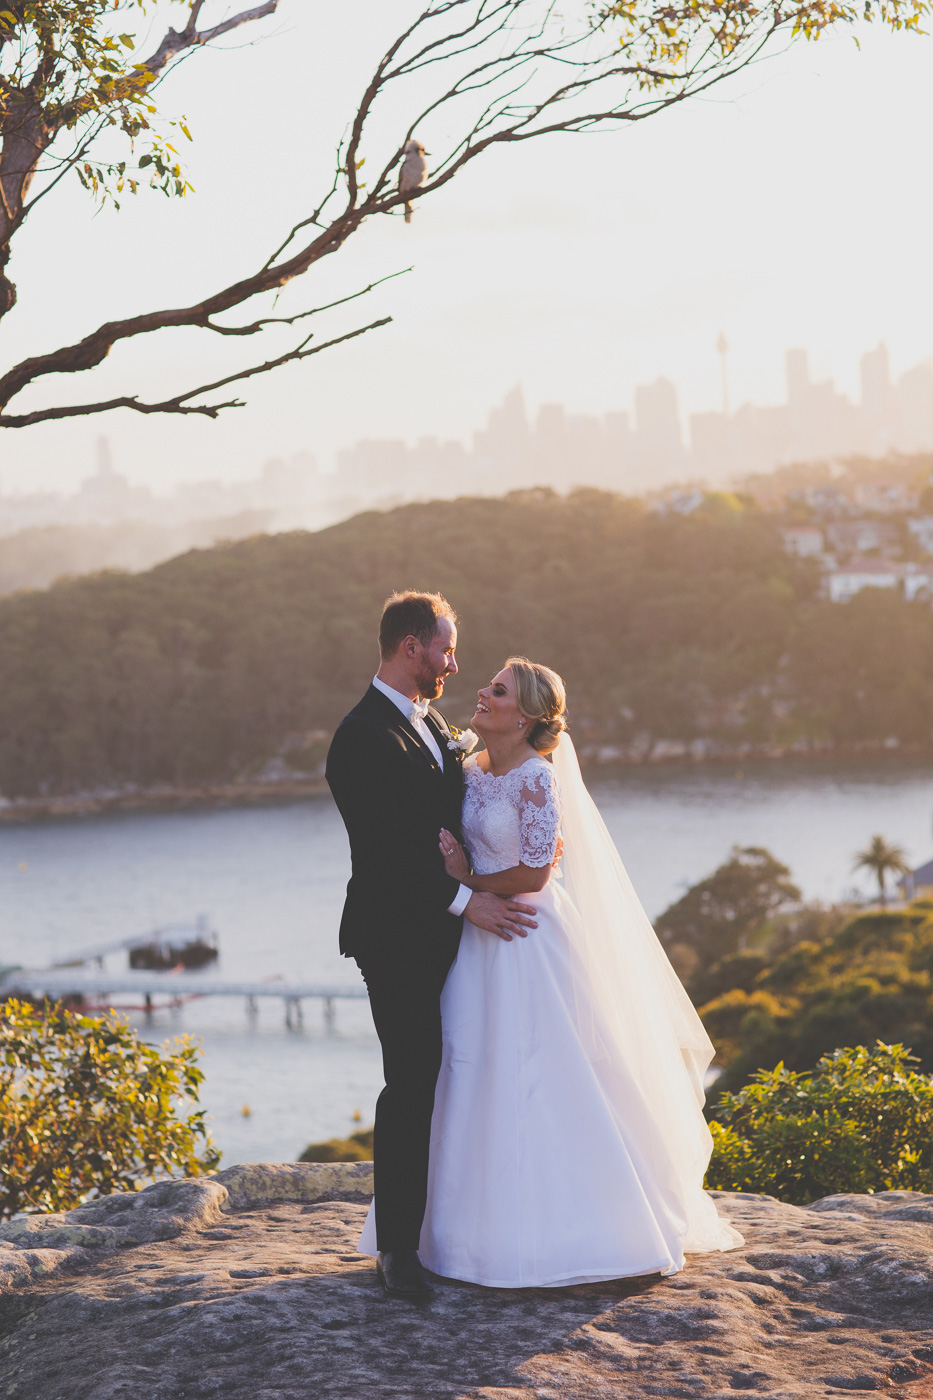 Rebecca and Justin said "I do" with a stunning harbour backdrop. Image: 